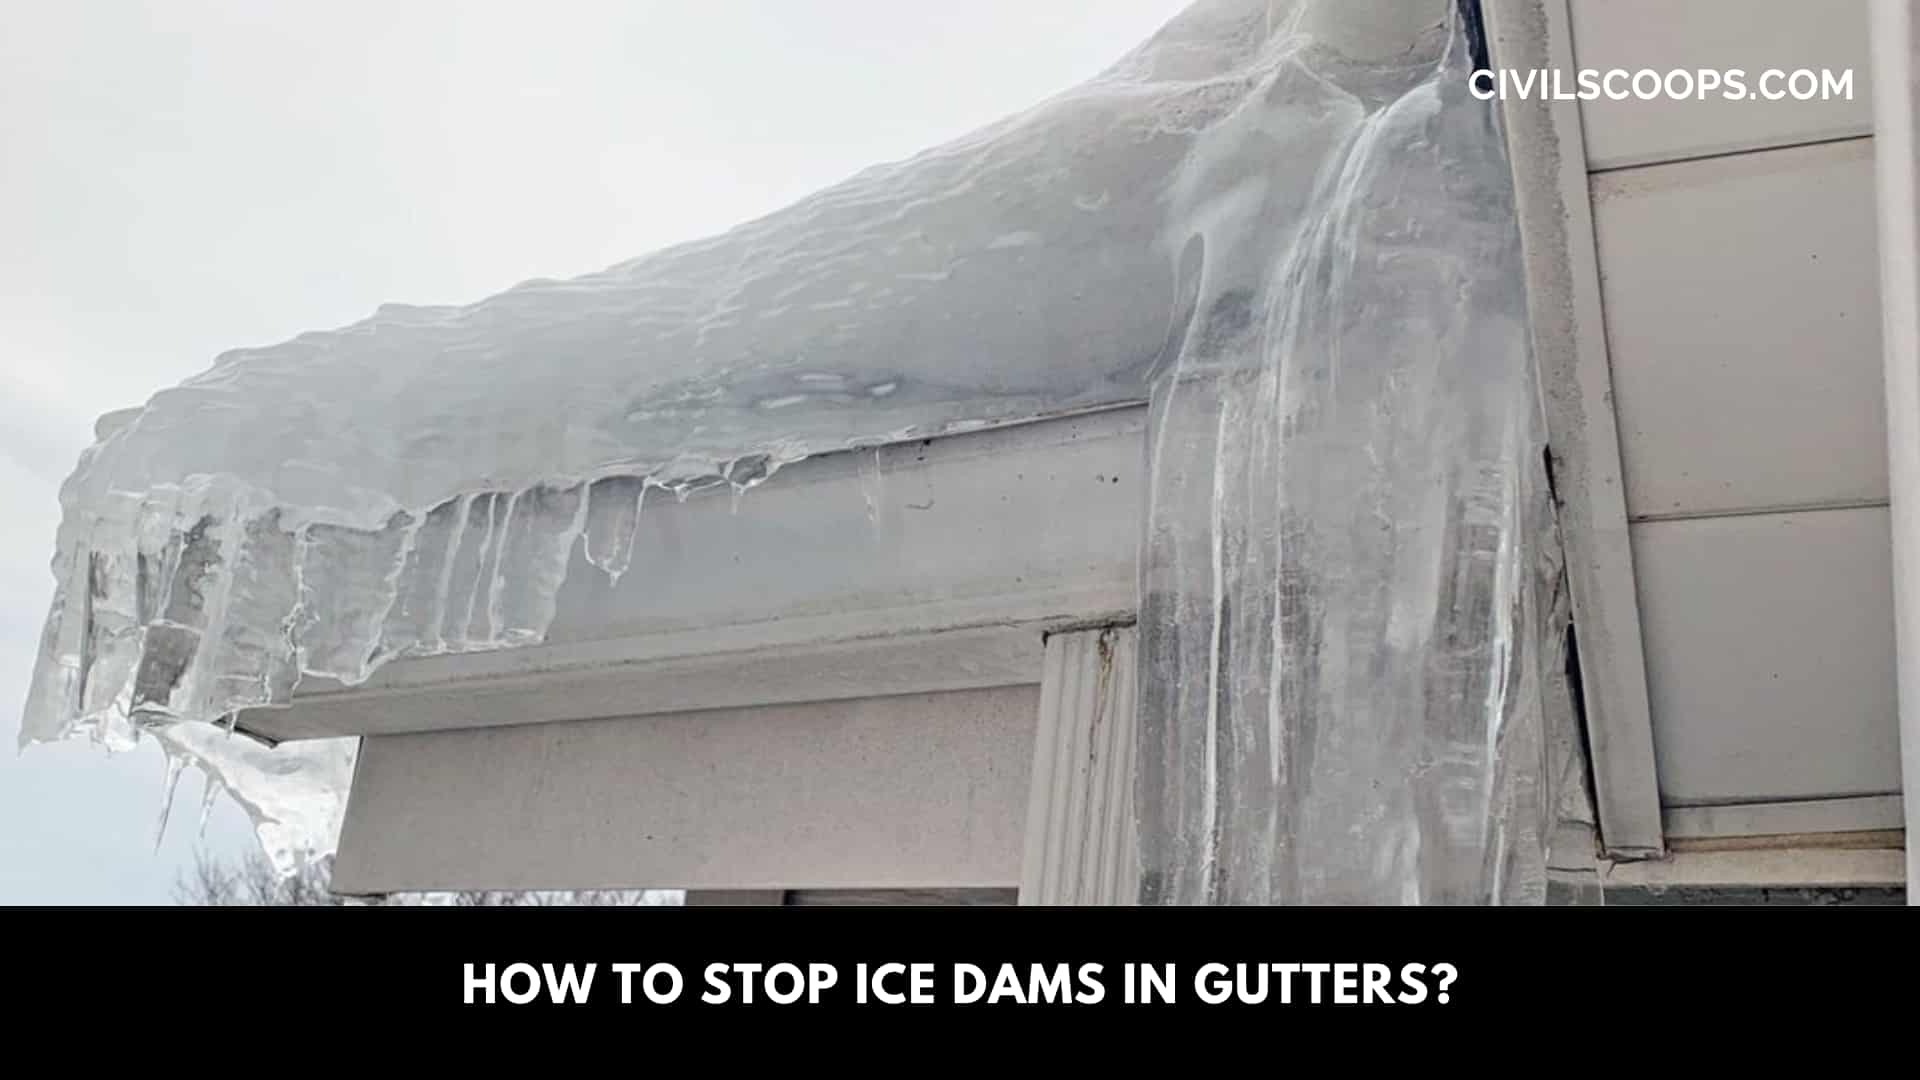 How to Stop Ice Dams in Gutters?